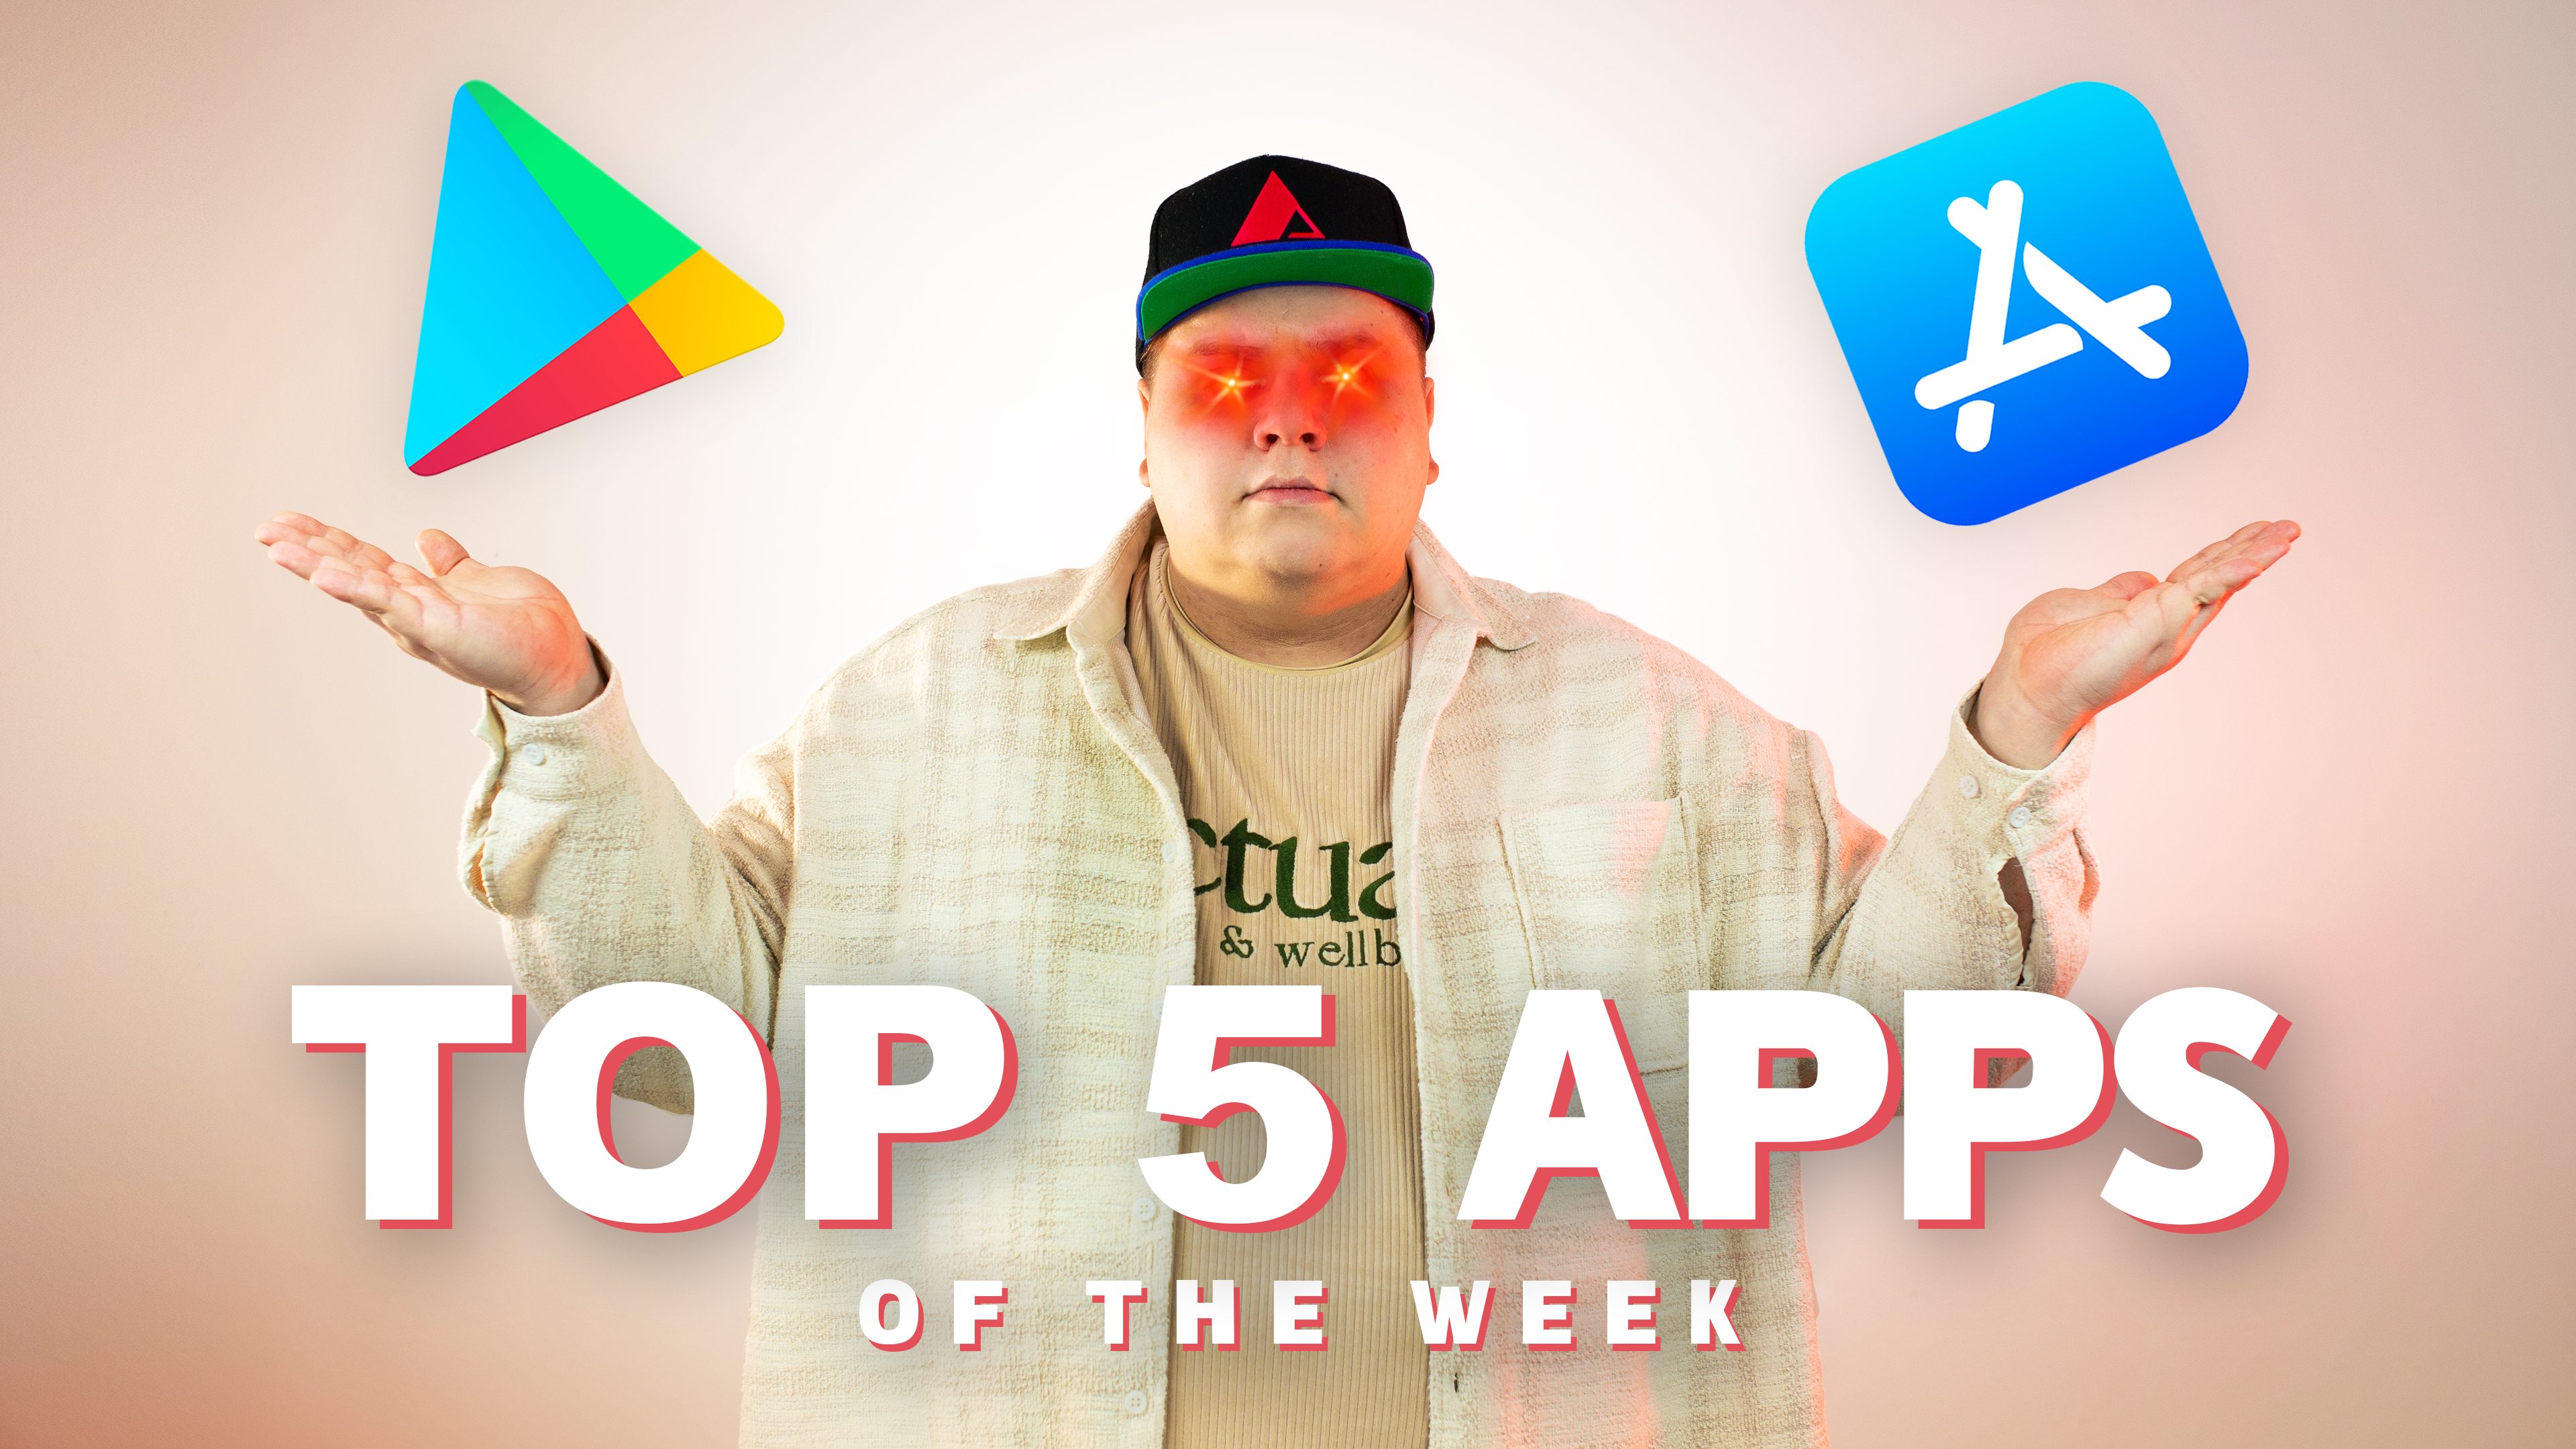 Top 5 Android and iOS apps of the week